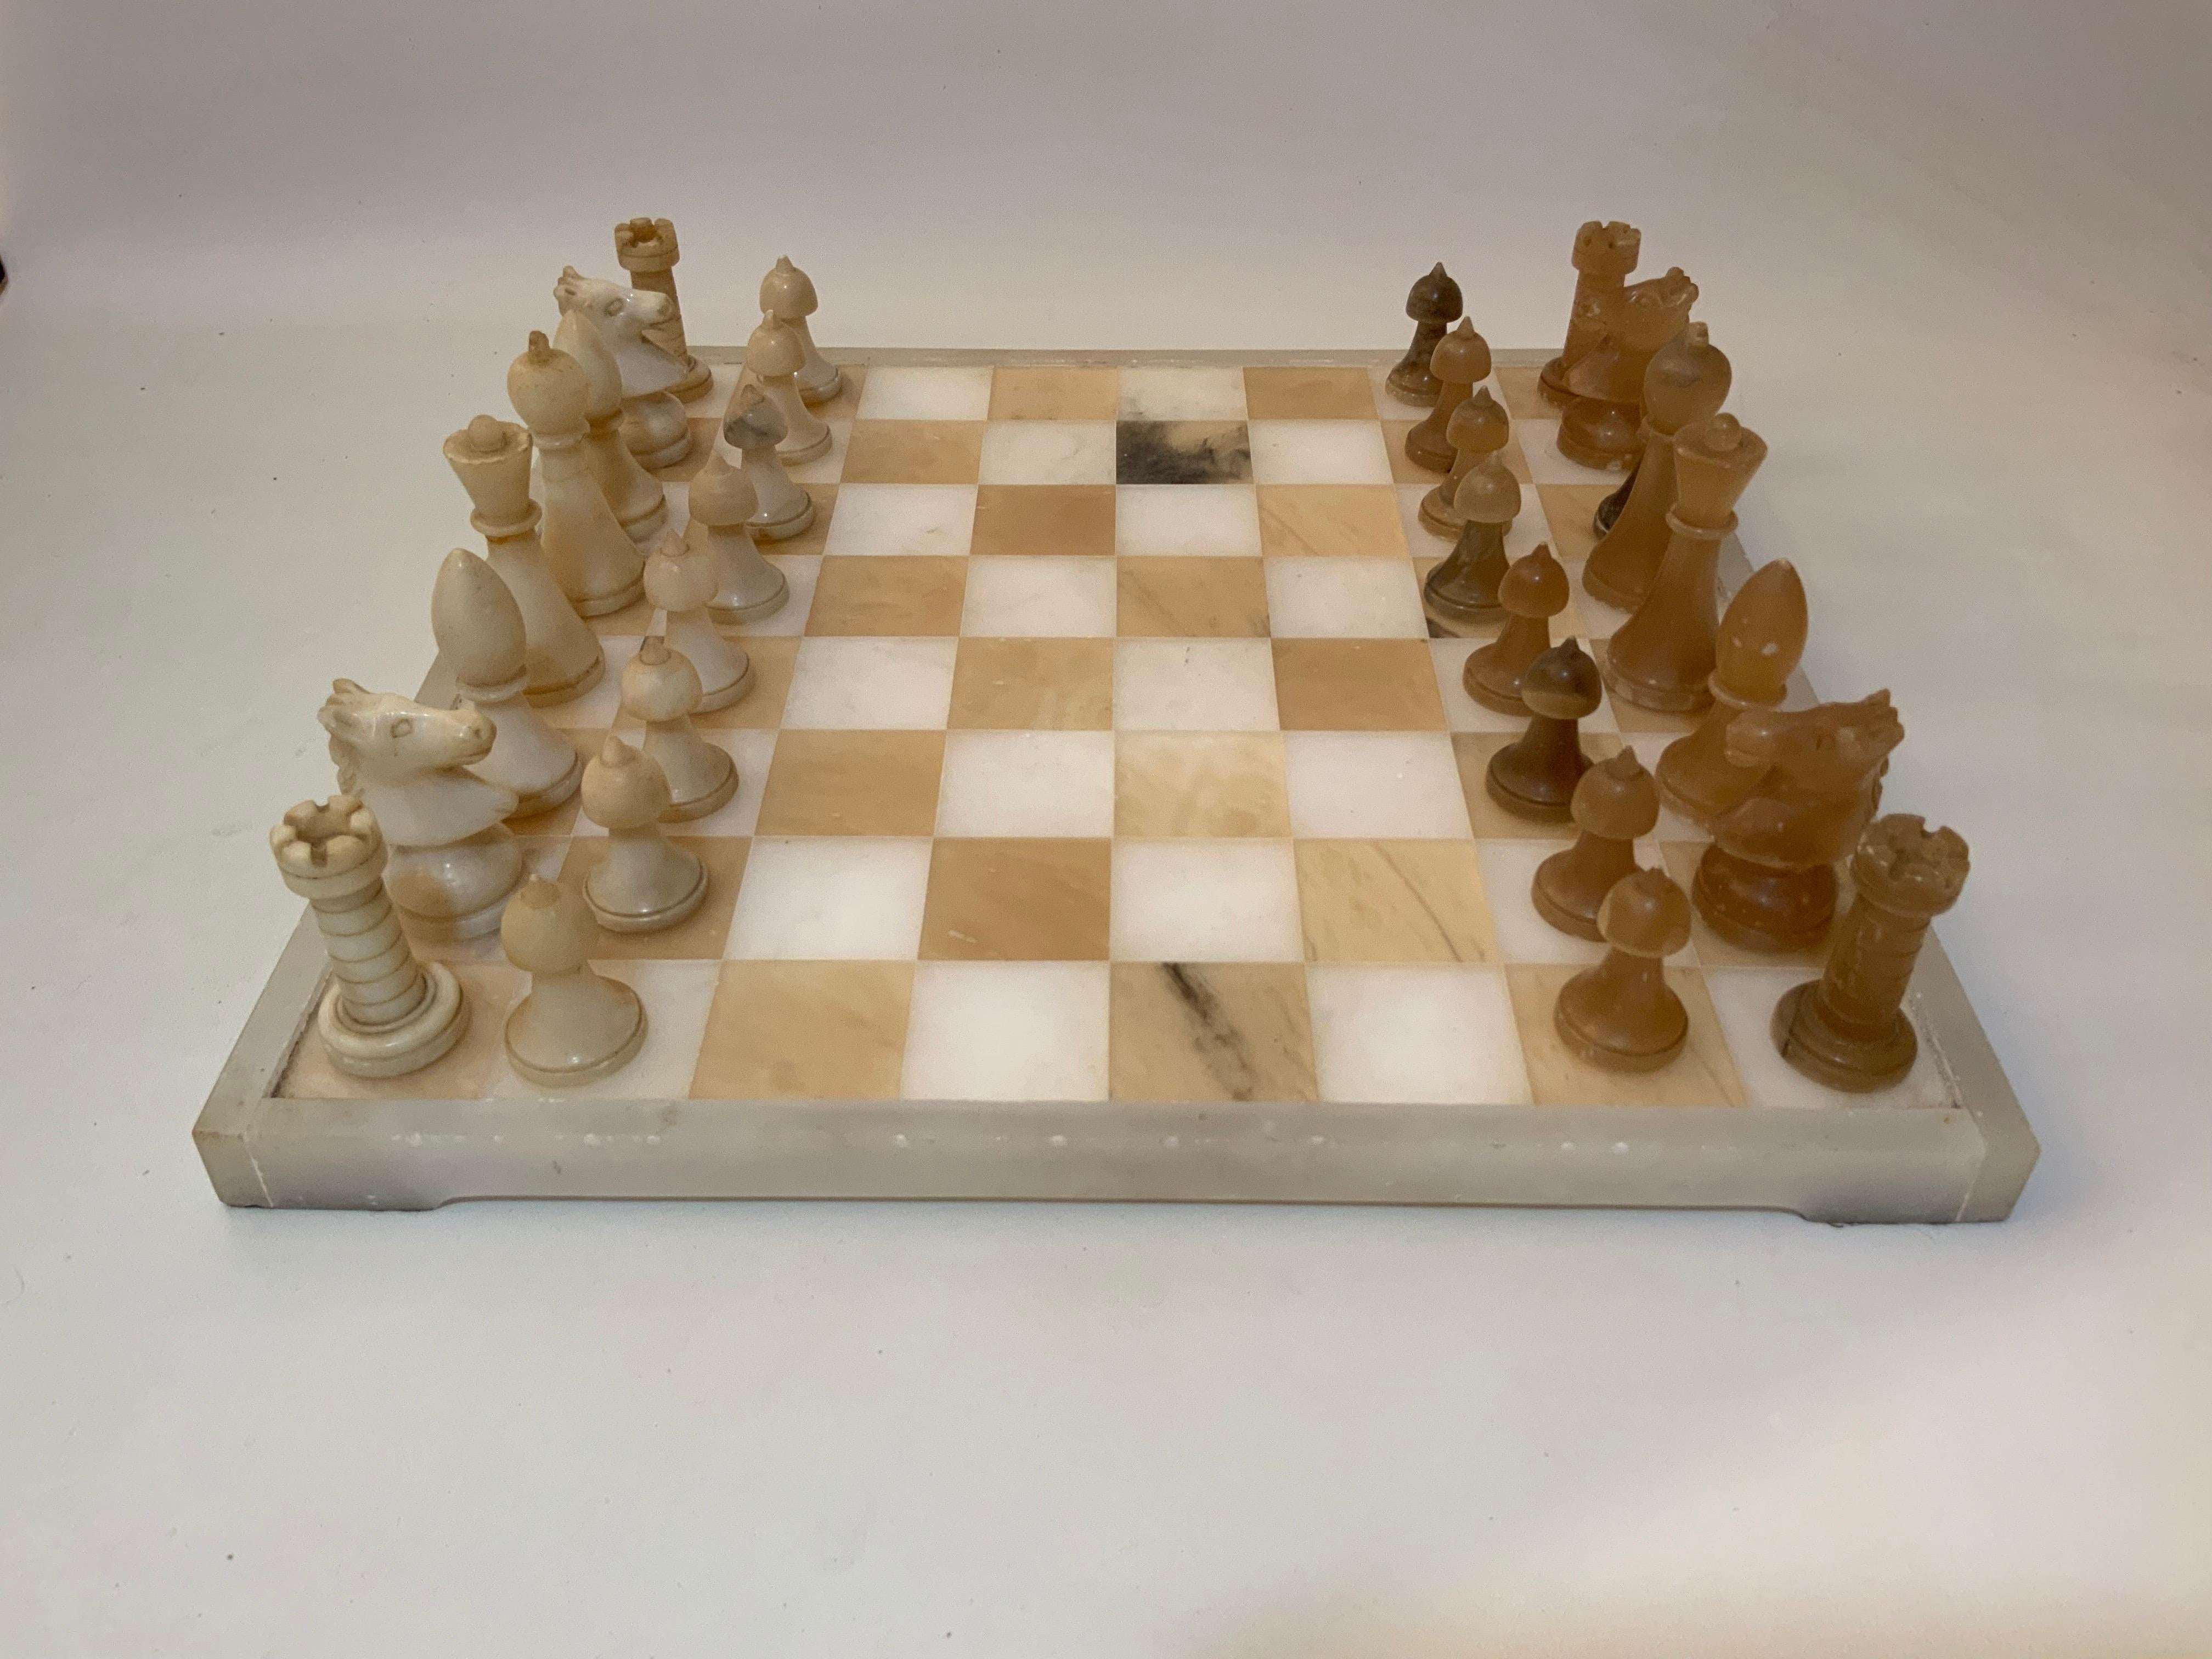 Complete circa 1930 carved marble chess set. Contains all its pieces that are beautifully carved and polished. Good condition with some minor bumps, dings, base chips and scratches. The white queen has an old glue repair to its crown and the white